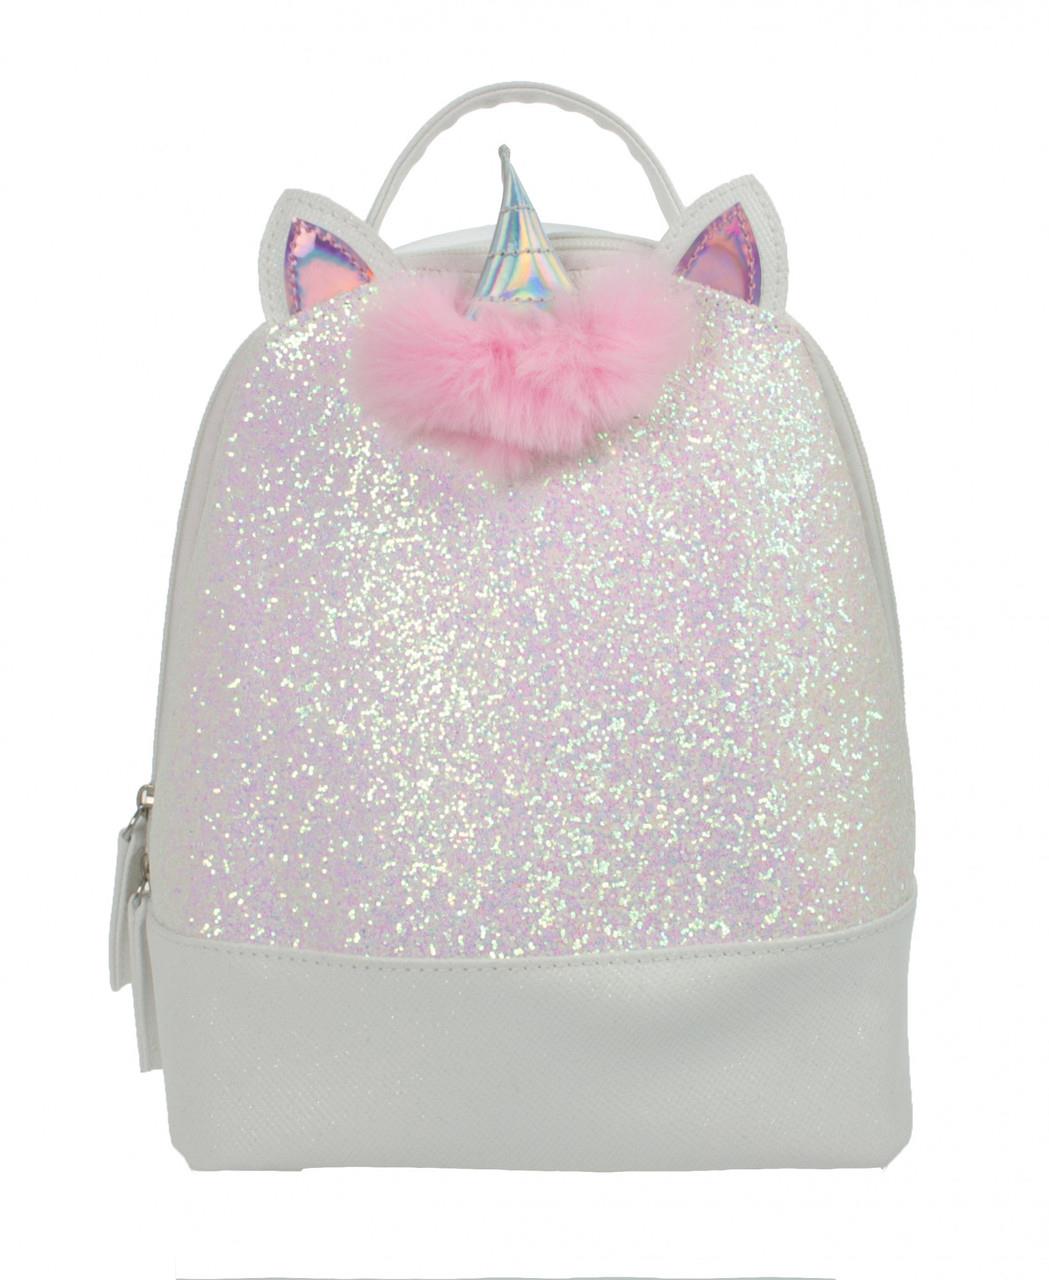 Girls Sparkly Unicorn Backpack with Horn and ears